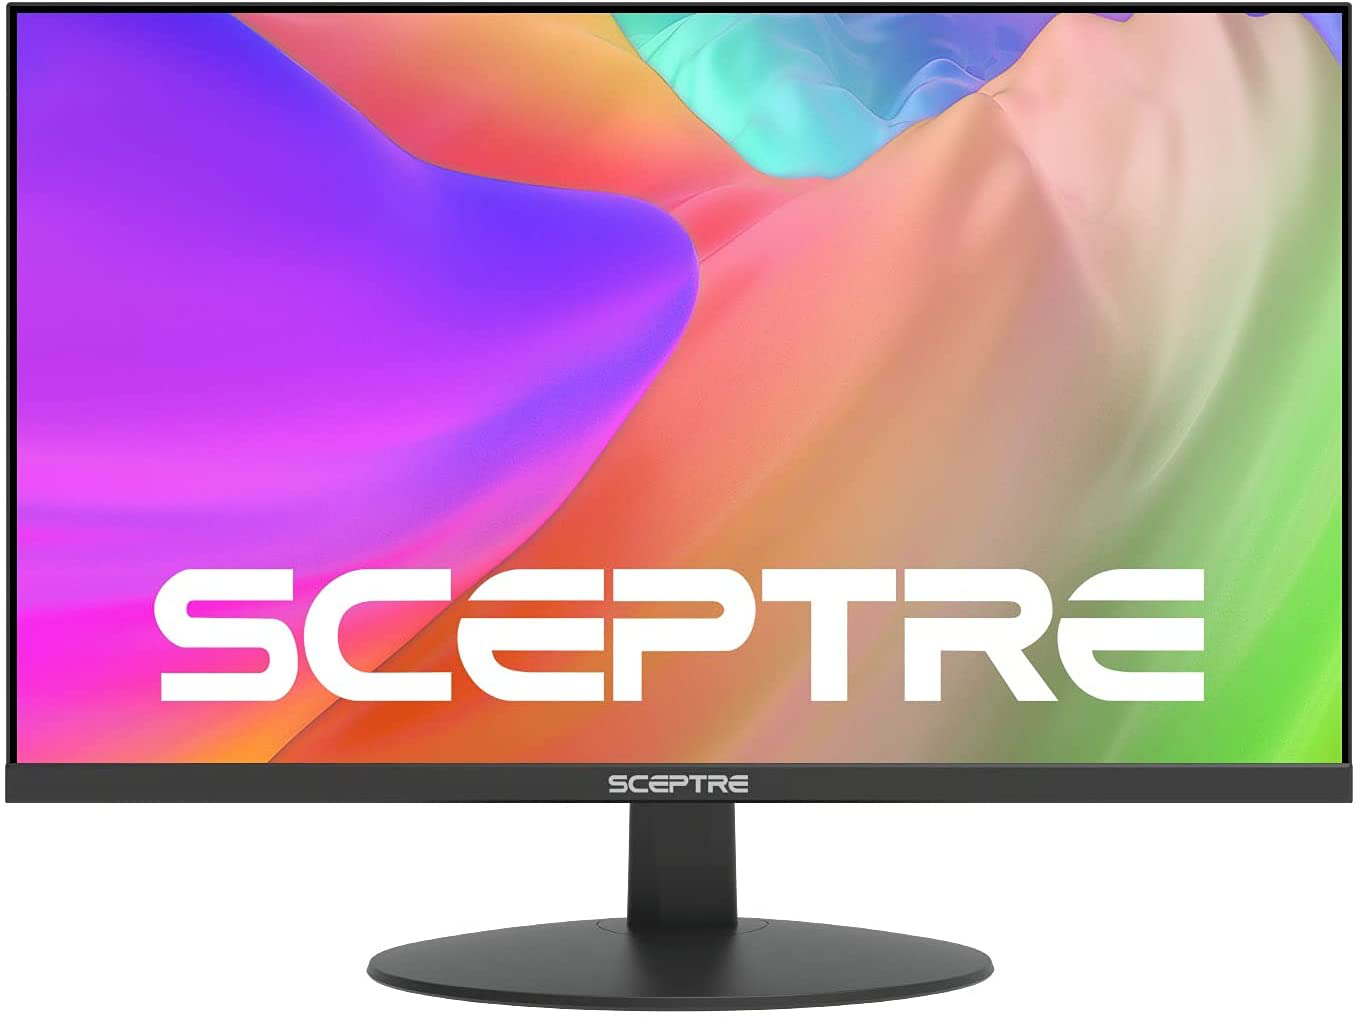 Sceptre IPS 24-Inch Business Computer Monitor 1080P 75Hz with HDMI VGA Build-In Speakers, Machine Black (E248W-FPT)